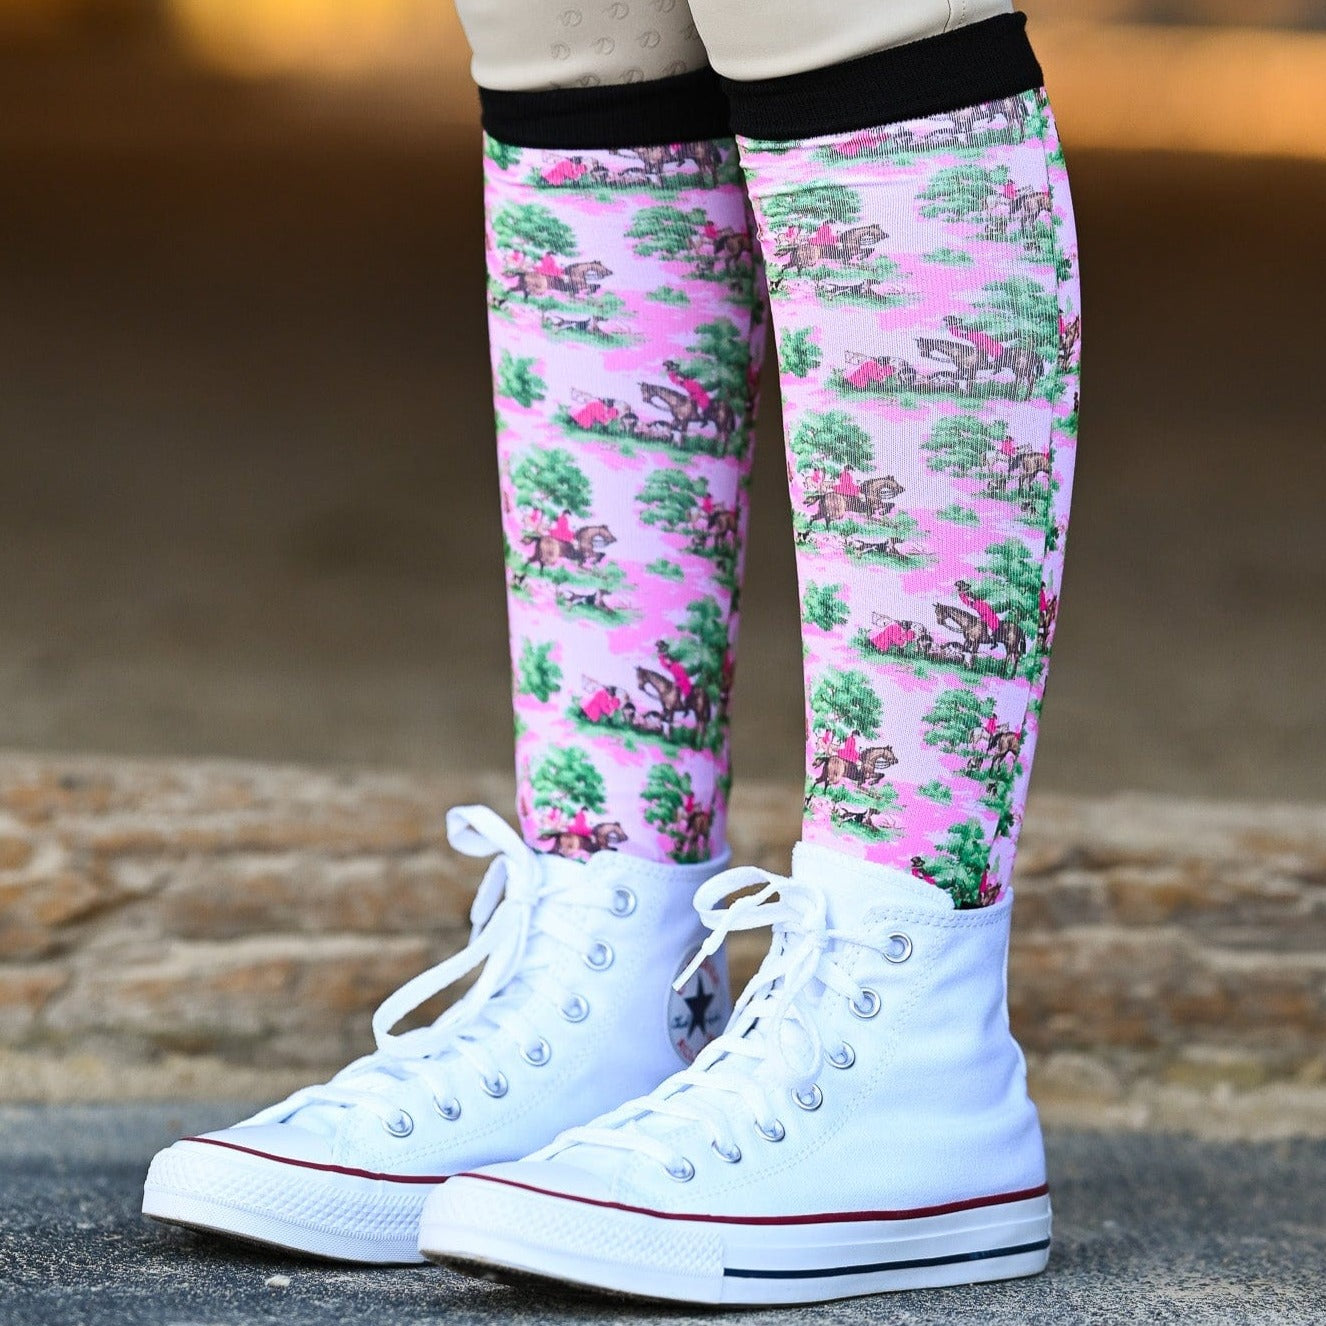 dreamers & schemers Pair & A Spare Pony Mac Pink Tally Ho Pair & a Spare equestrian boot socks boot socks thin socks riding socks pattern socks tall socks funny socks knee high socks horse socks horse show socks